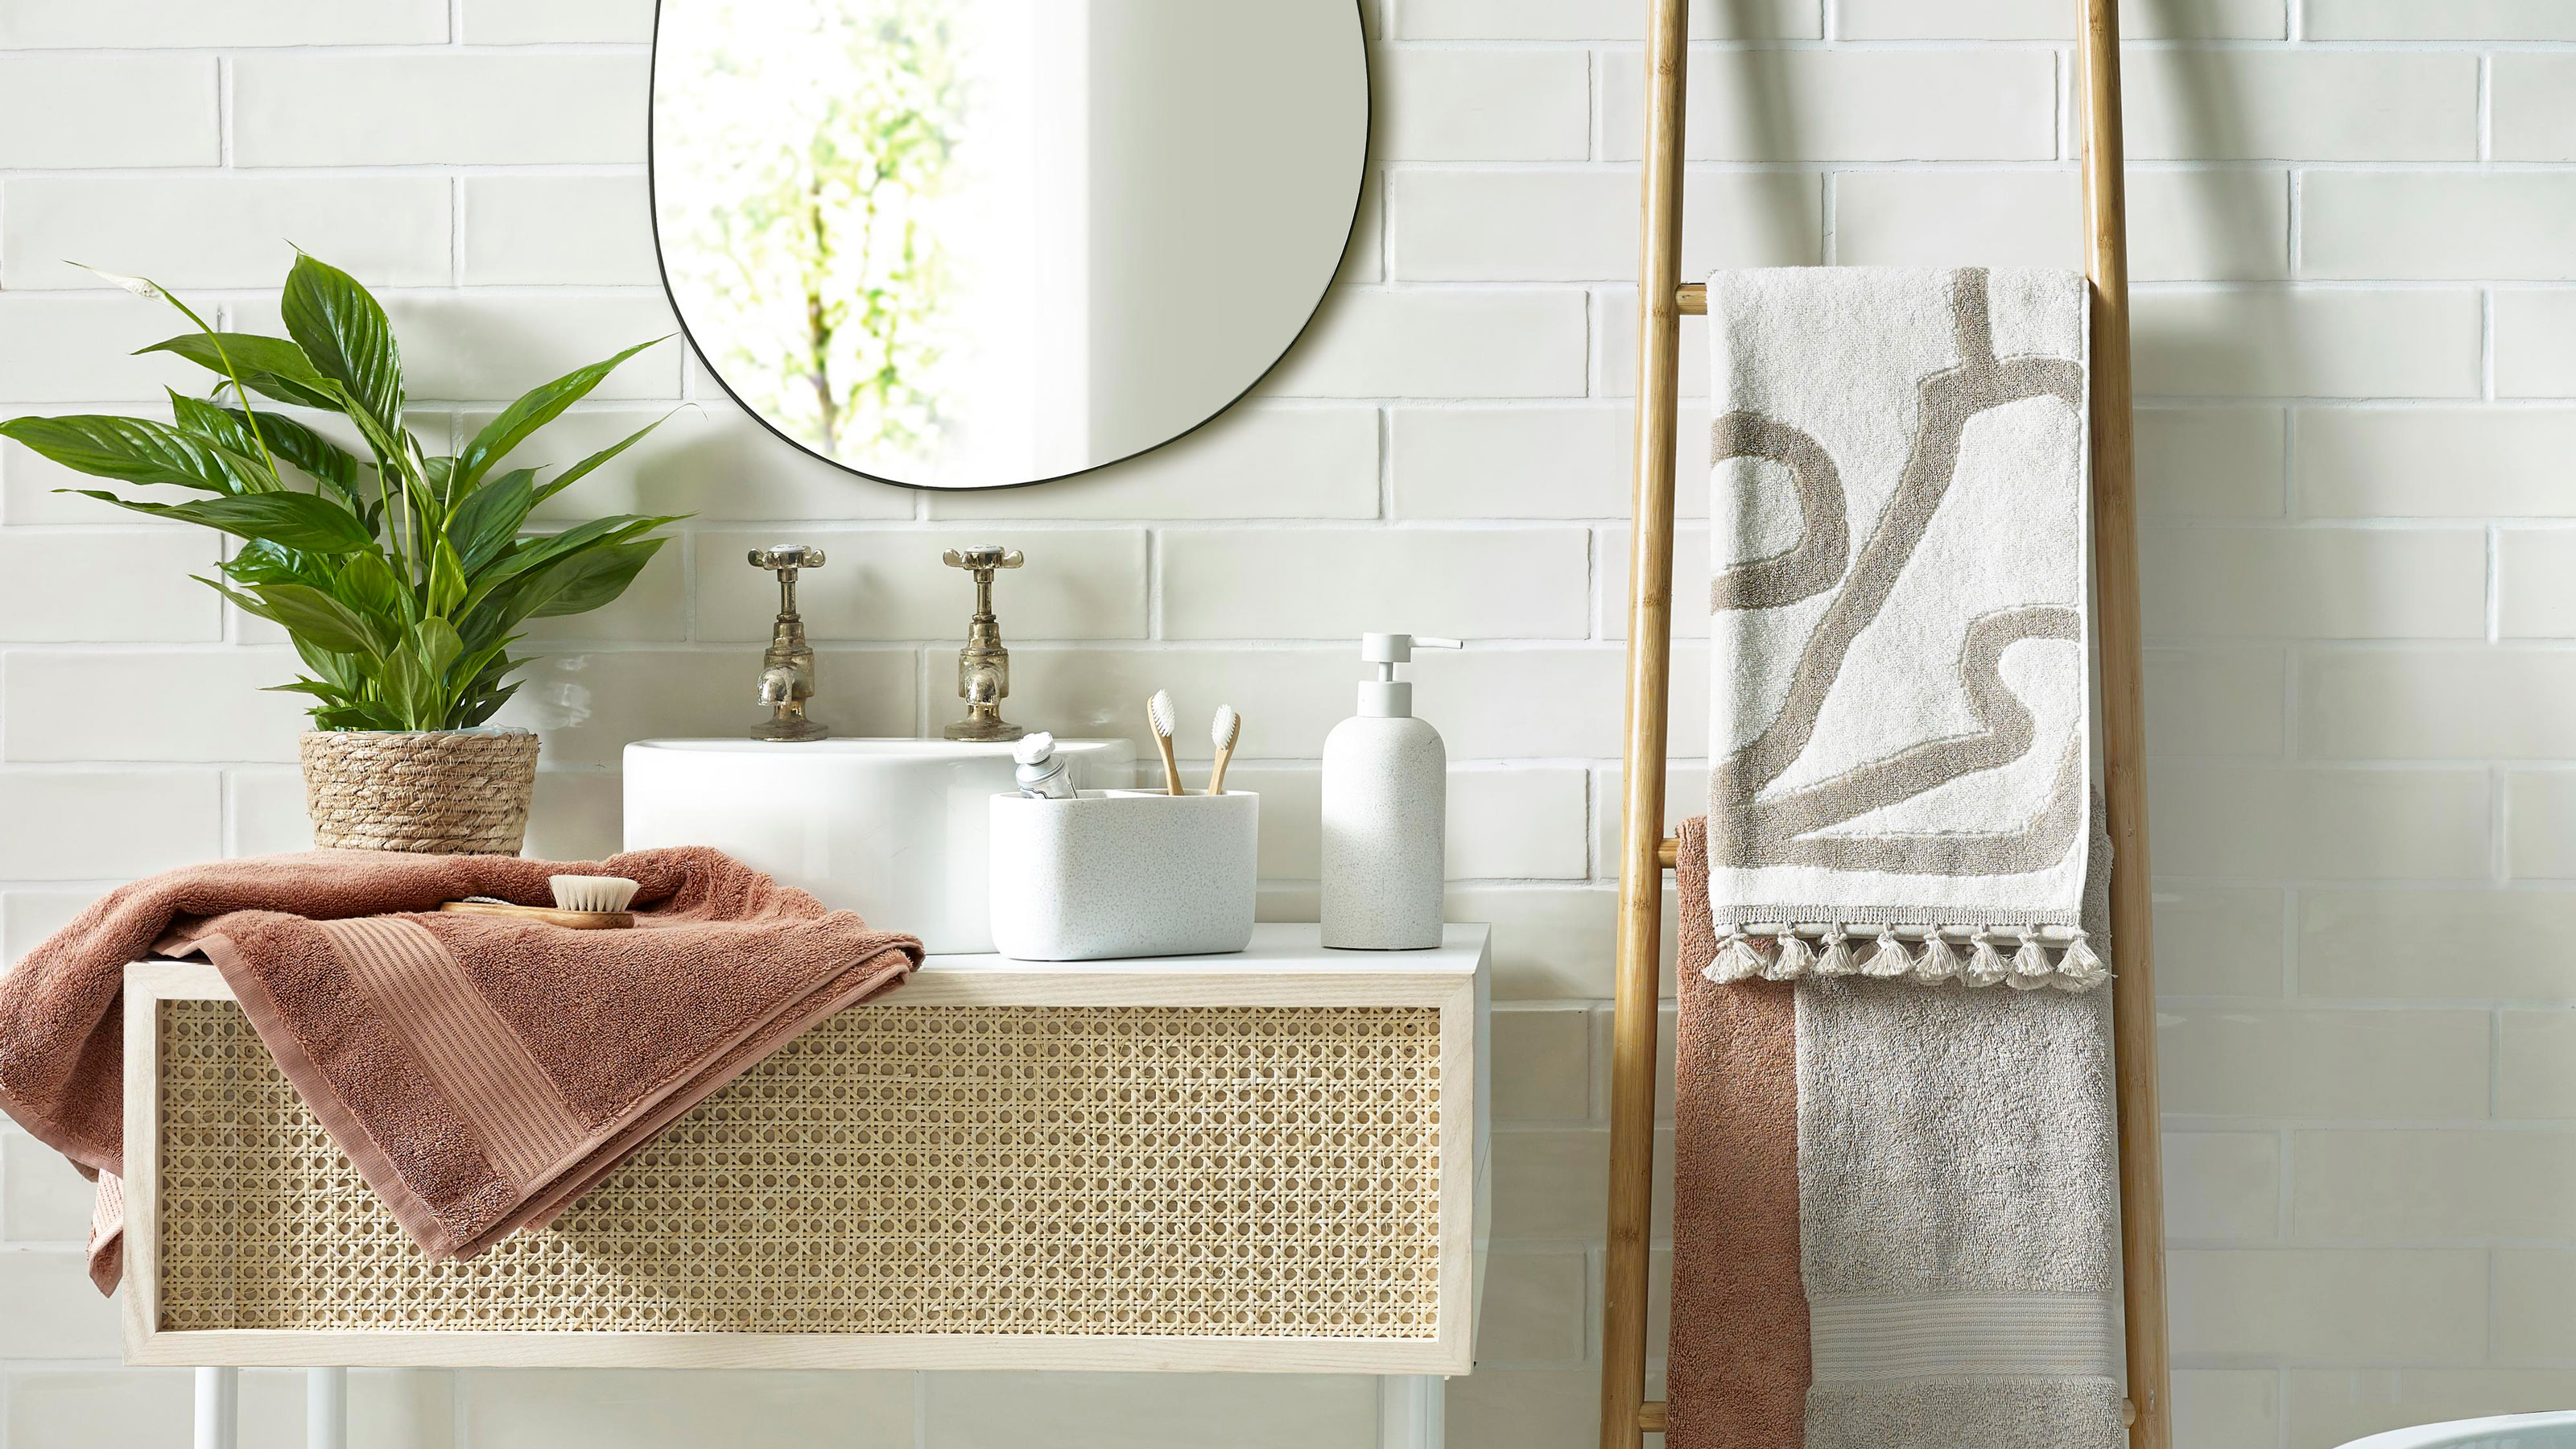 25 bathroom ideas for every space, style and budget   Real Homes